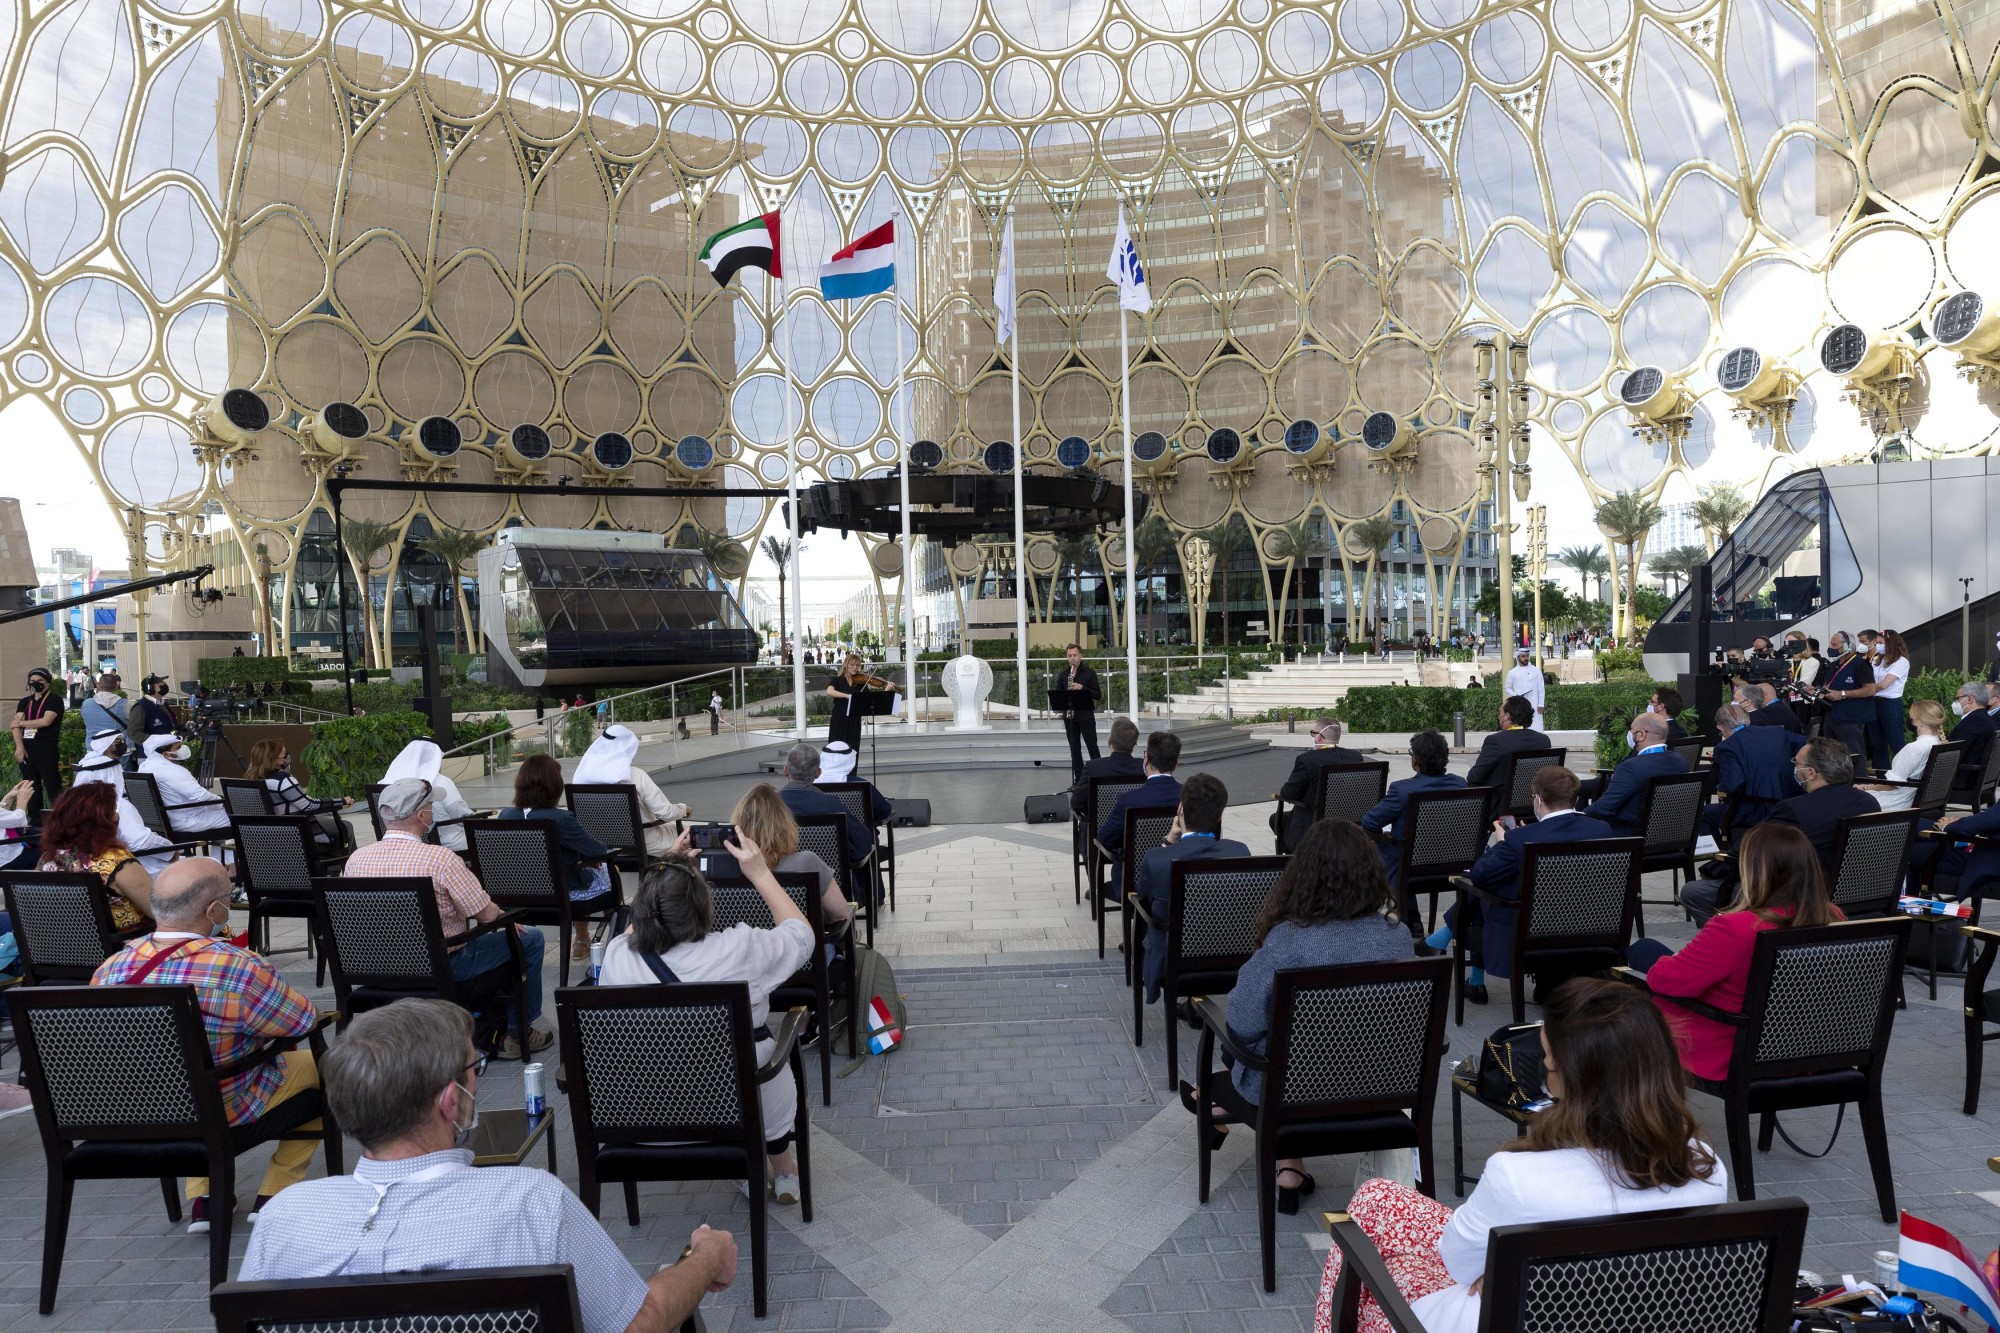 Cultural performance during the Luxembourg National Day Ceremony at Al Wasl m36590